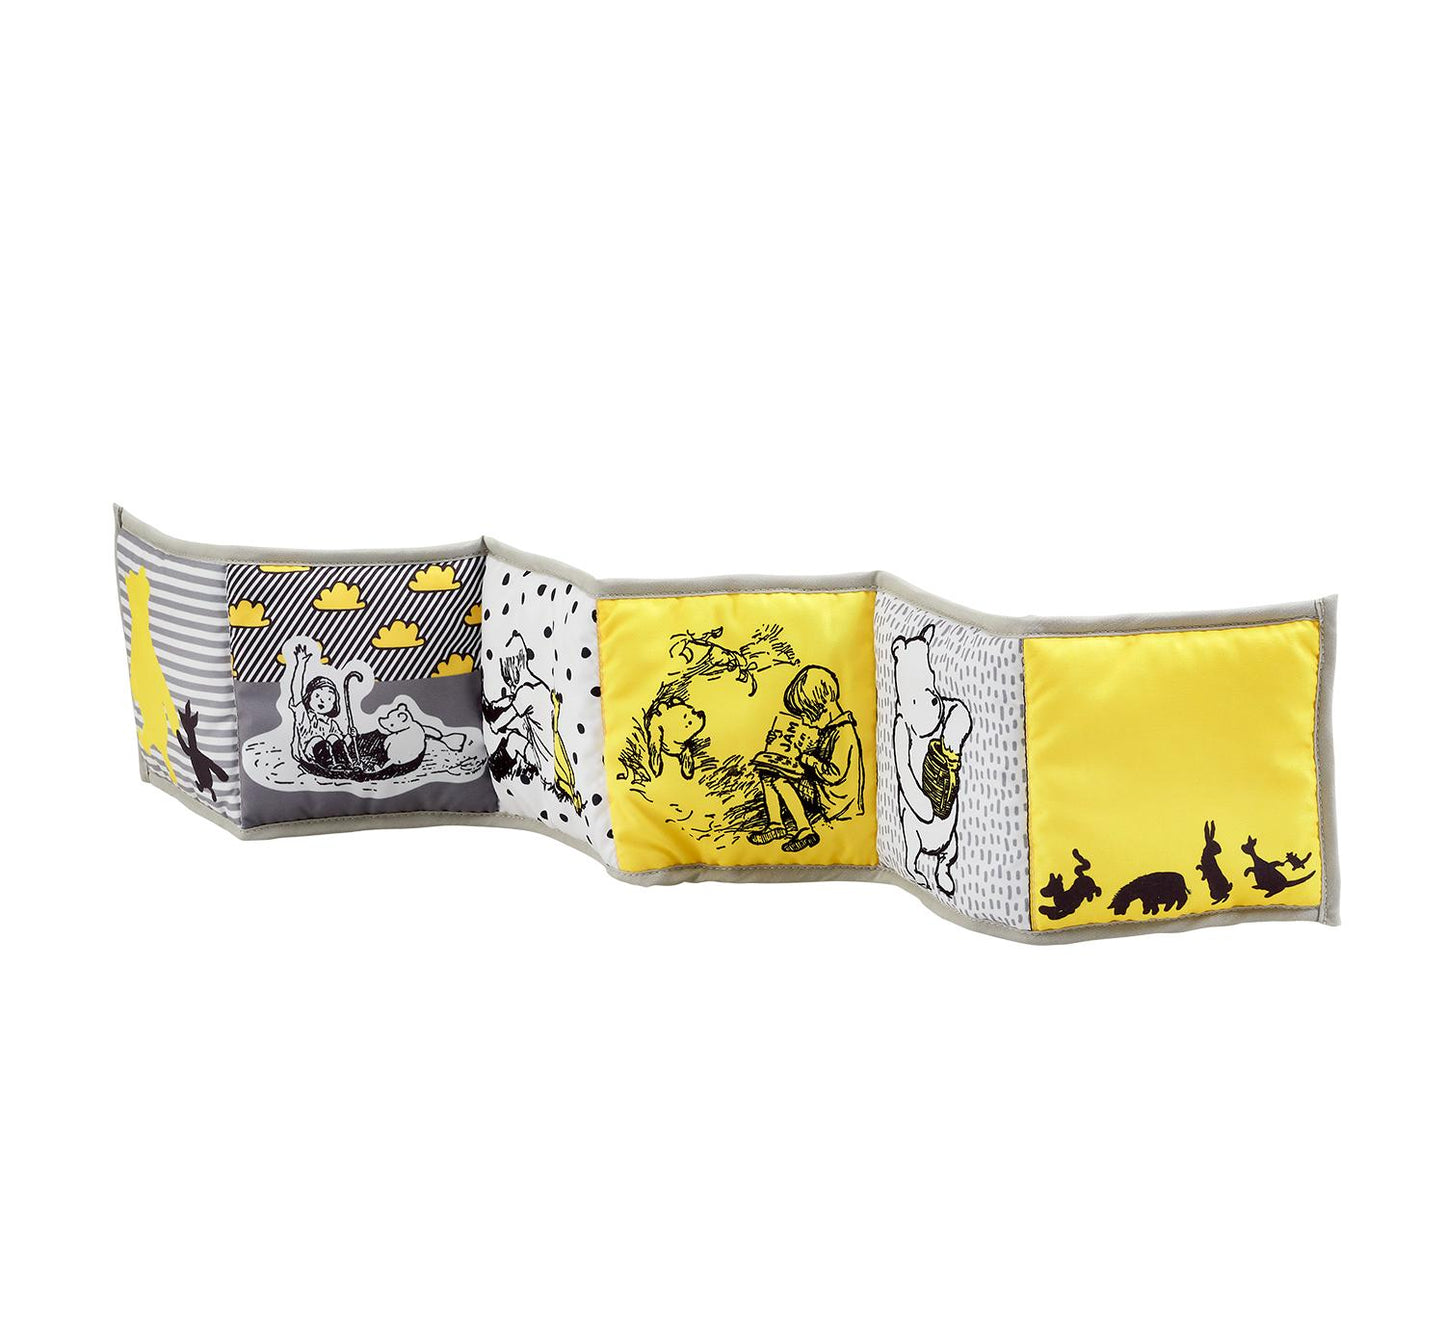 Winnie the Pooh Unfold & Discover Book